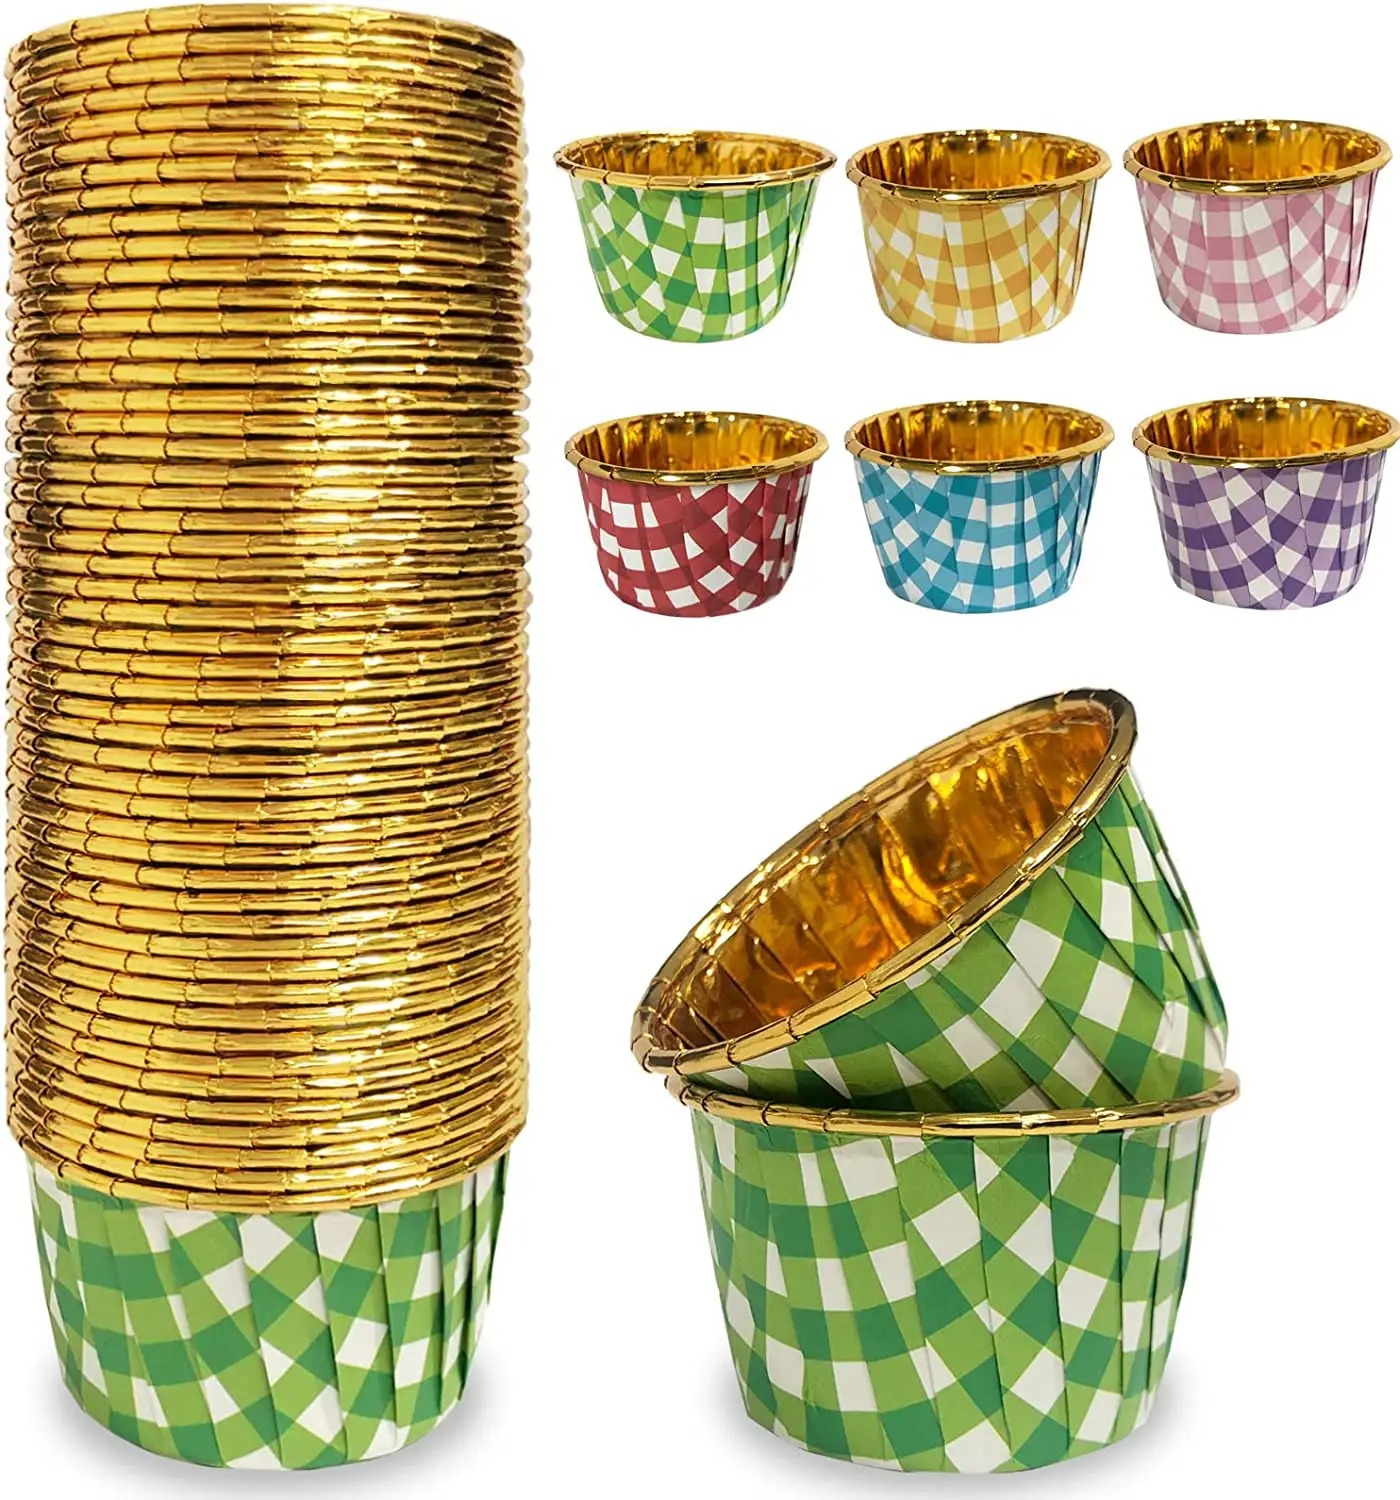 Green Aluminum Foil Cupcake Baking Cups, Checkered Gold Foil Cupcake Liners Muffin Liners Mini Cake Cupcake Baking Mold Cups